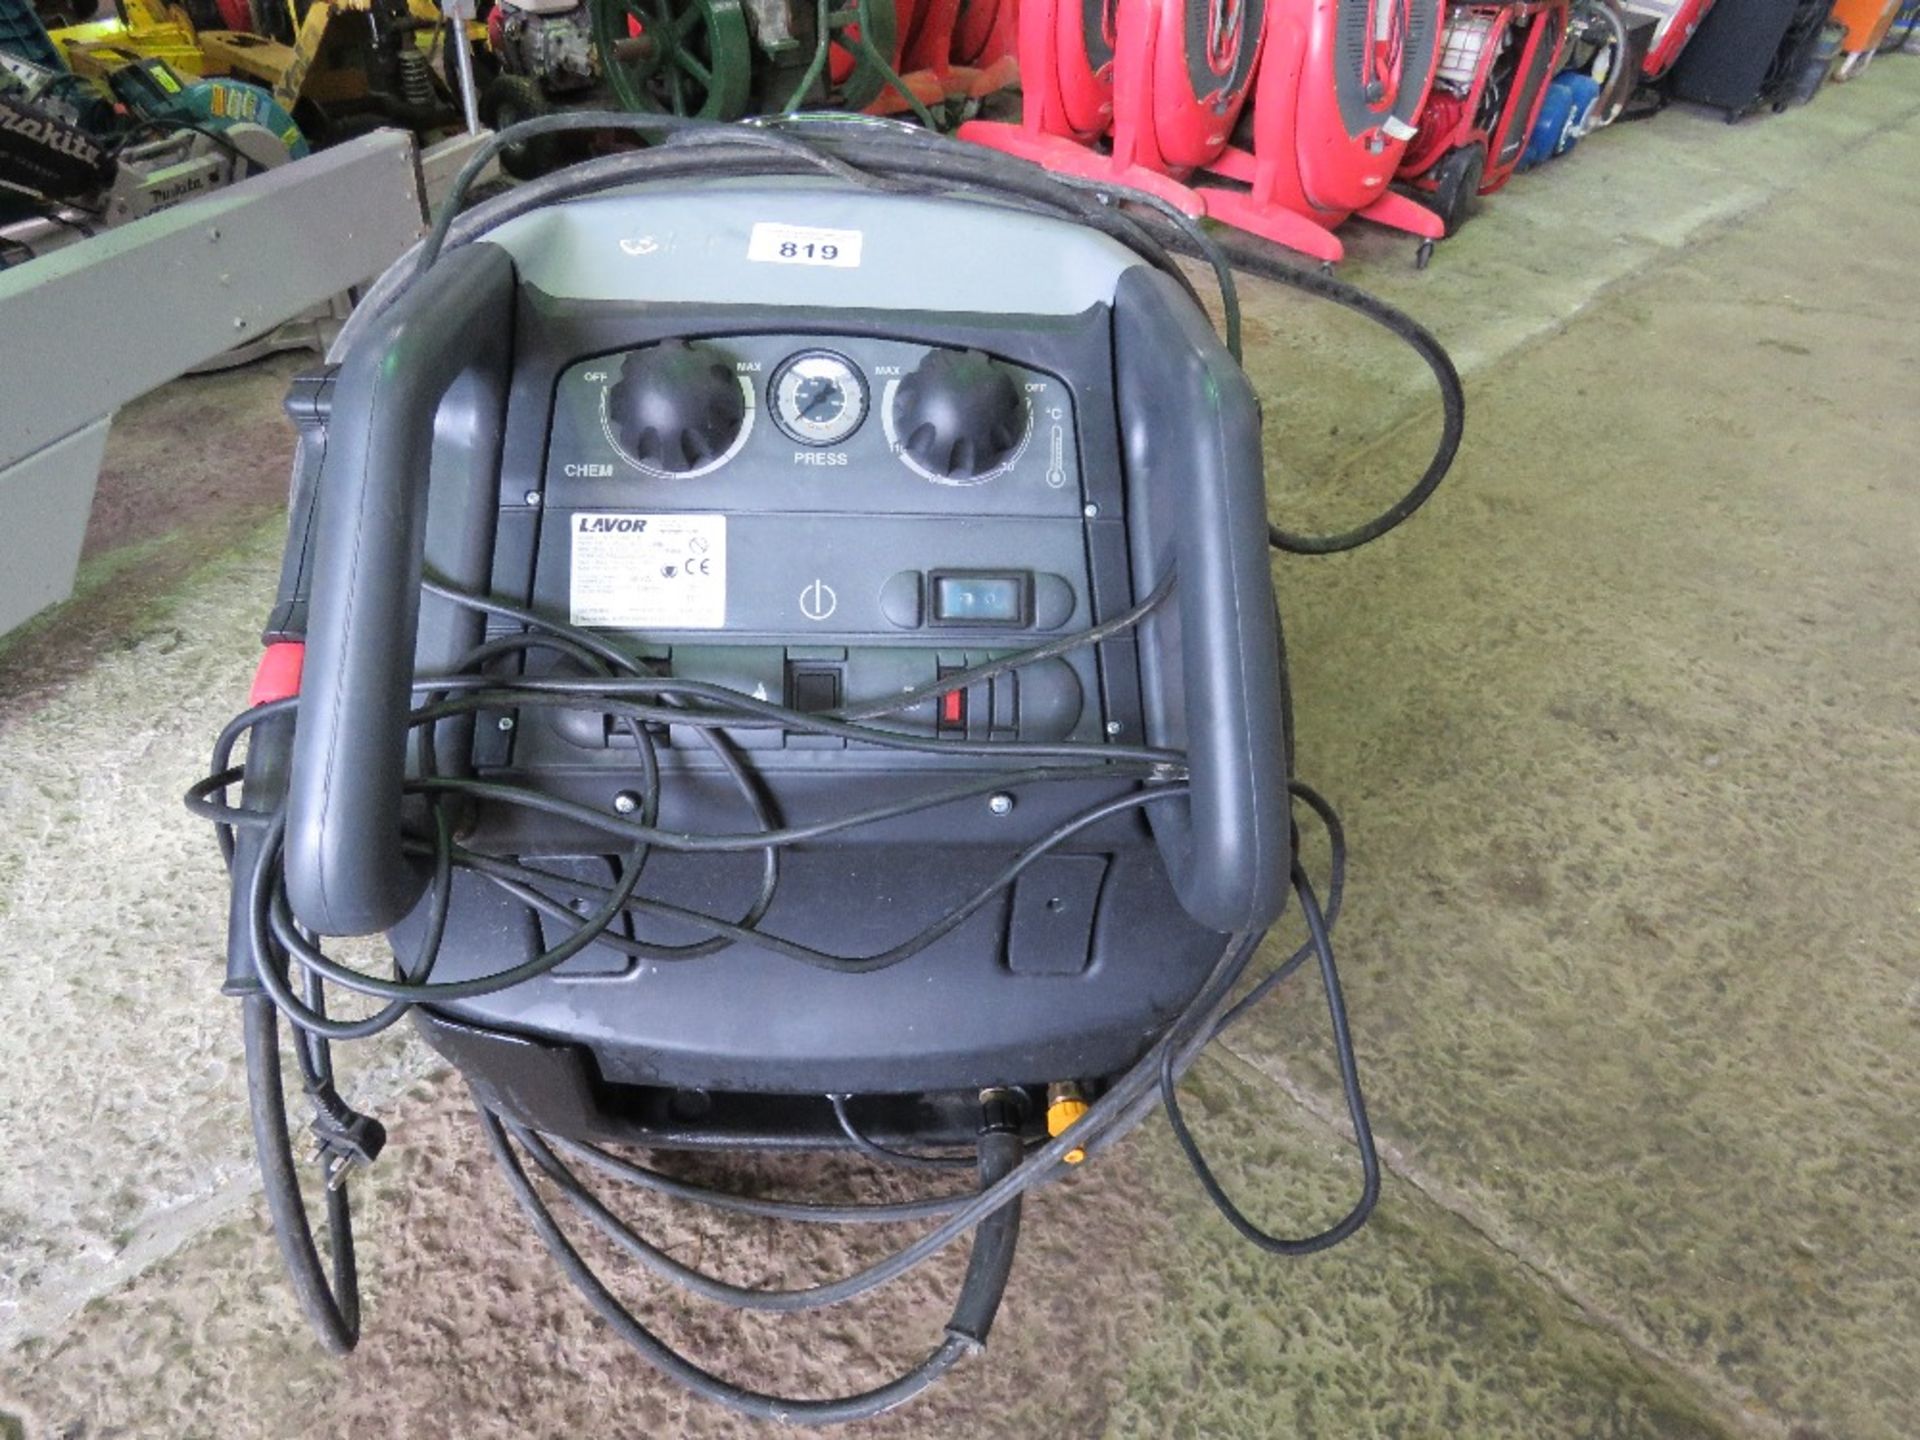 LAVOR 58KW PROFESSIONAL STEAM CLEANER, 240 VOLT, LITTLE USED SINCE PURCHASE IN SEPTEMBER 2021. WITH - Image 3 of 6